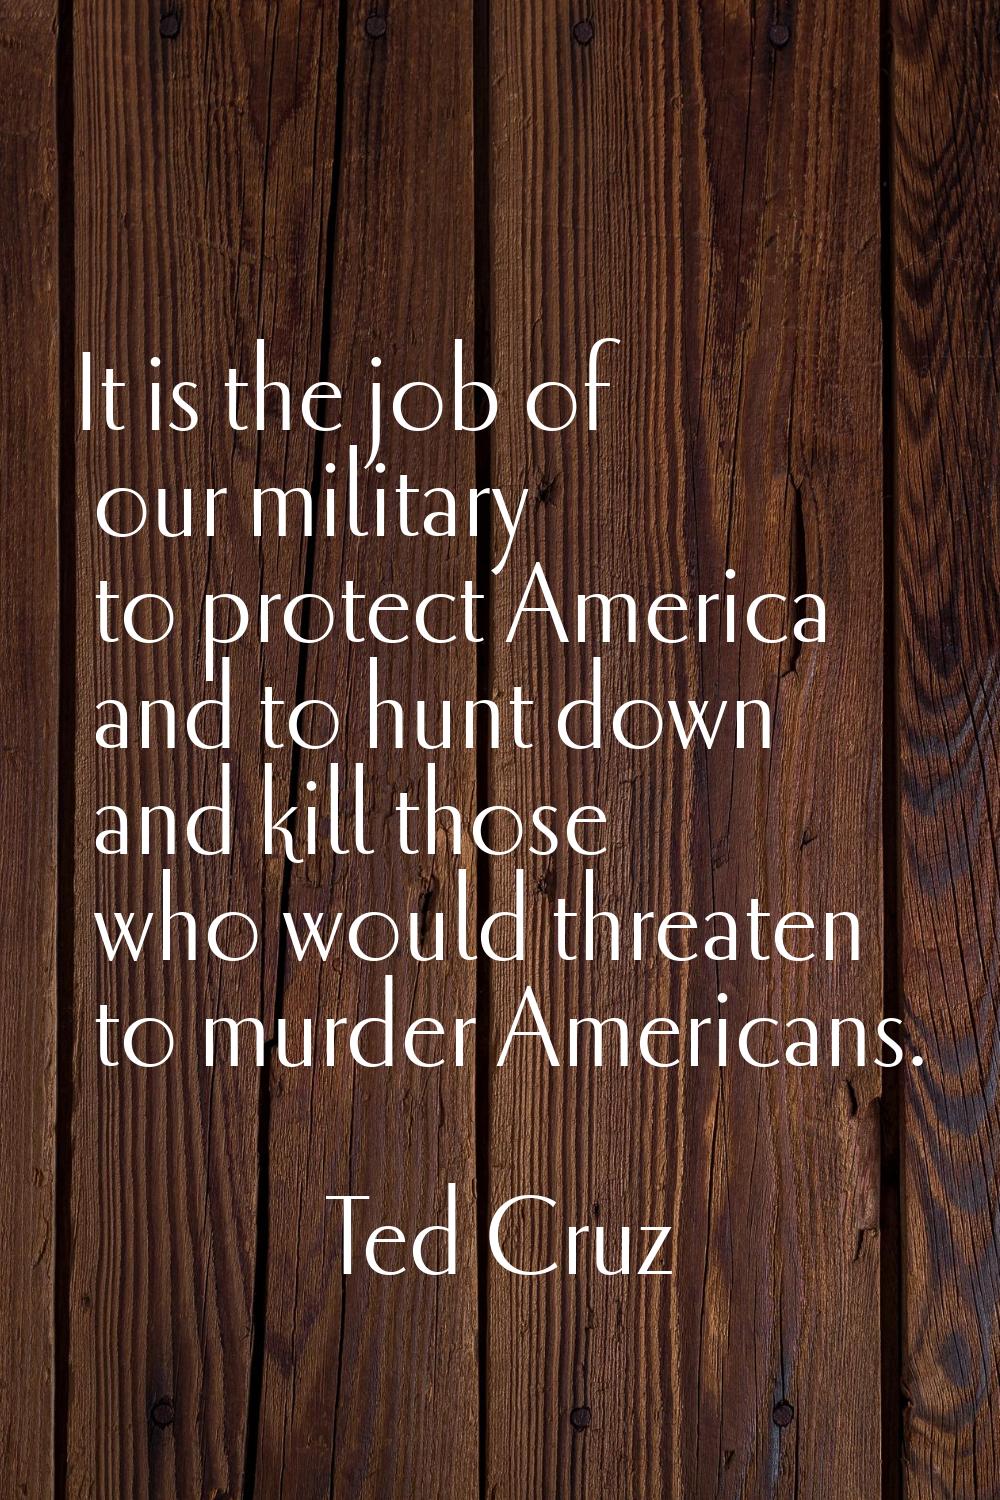 It is the job of our military to protect America and to hunt down and kill those who would threaten